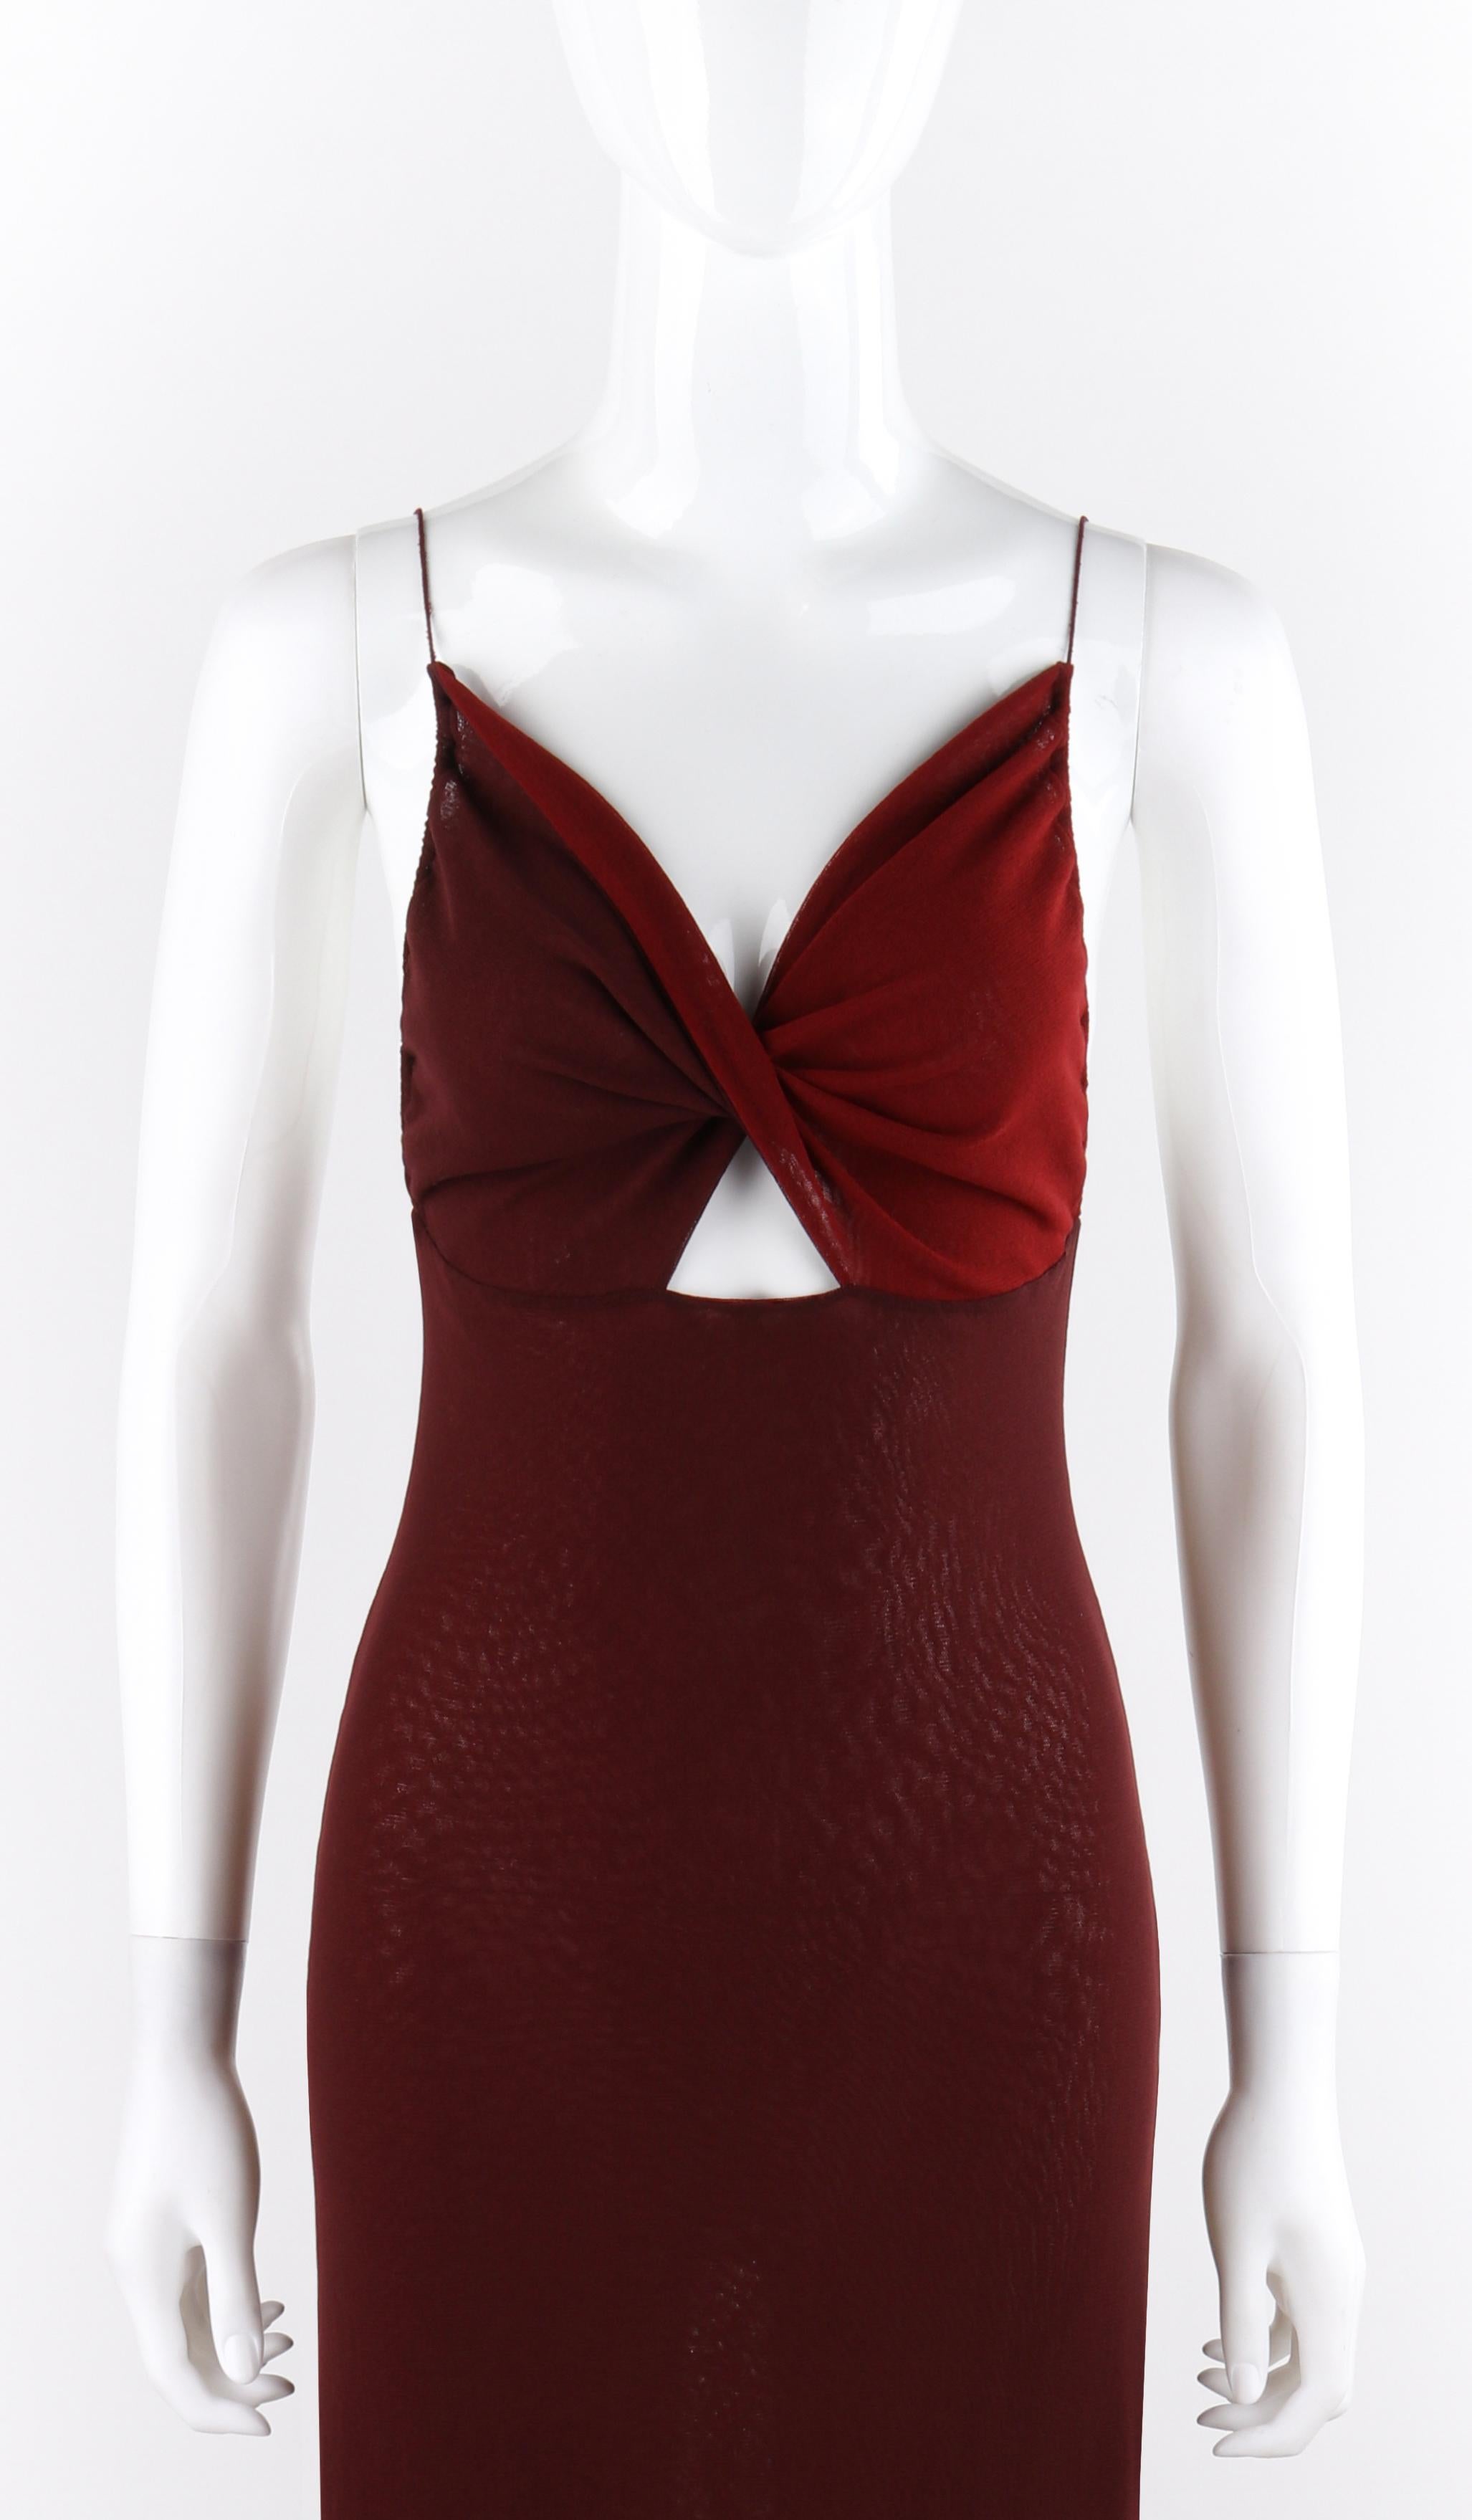 JEAN PAUL GAULTIER Burgundy Semi-Sheer Mesh Twist Cutout Tank Top Maxi Dress 
 
Brand / Manufacturer: Jean Paul Gaultier
Collection: Soliel
Style: Twist Front Cutout Maxi Dress
Color(s): Shades of Burgundy
Lined: No
Marked Fabric Content: 100% Nylon